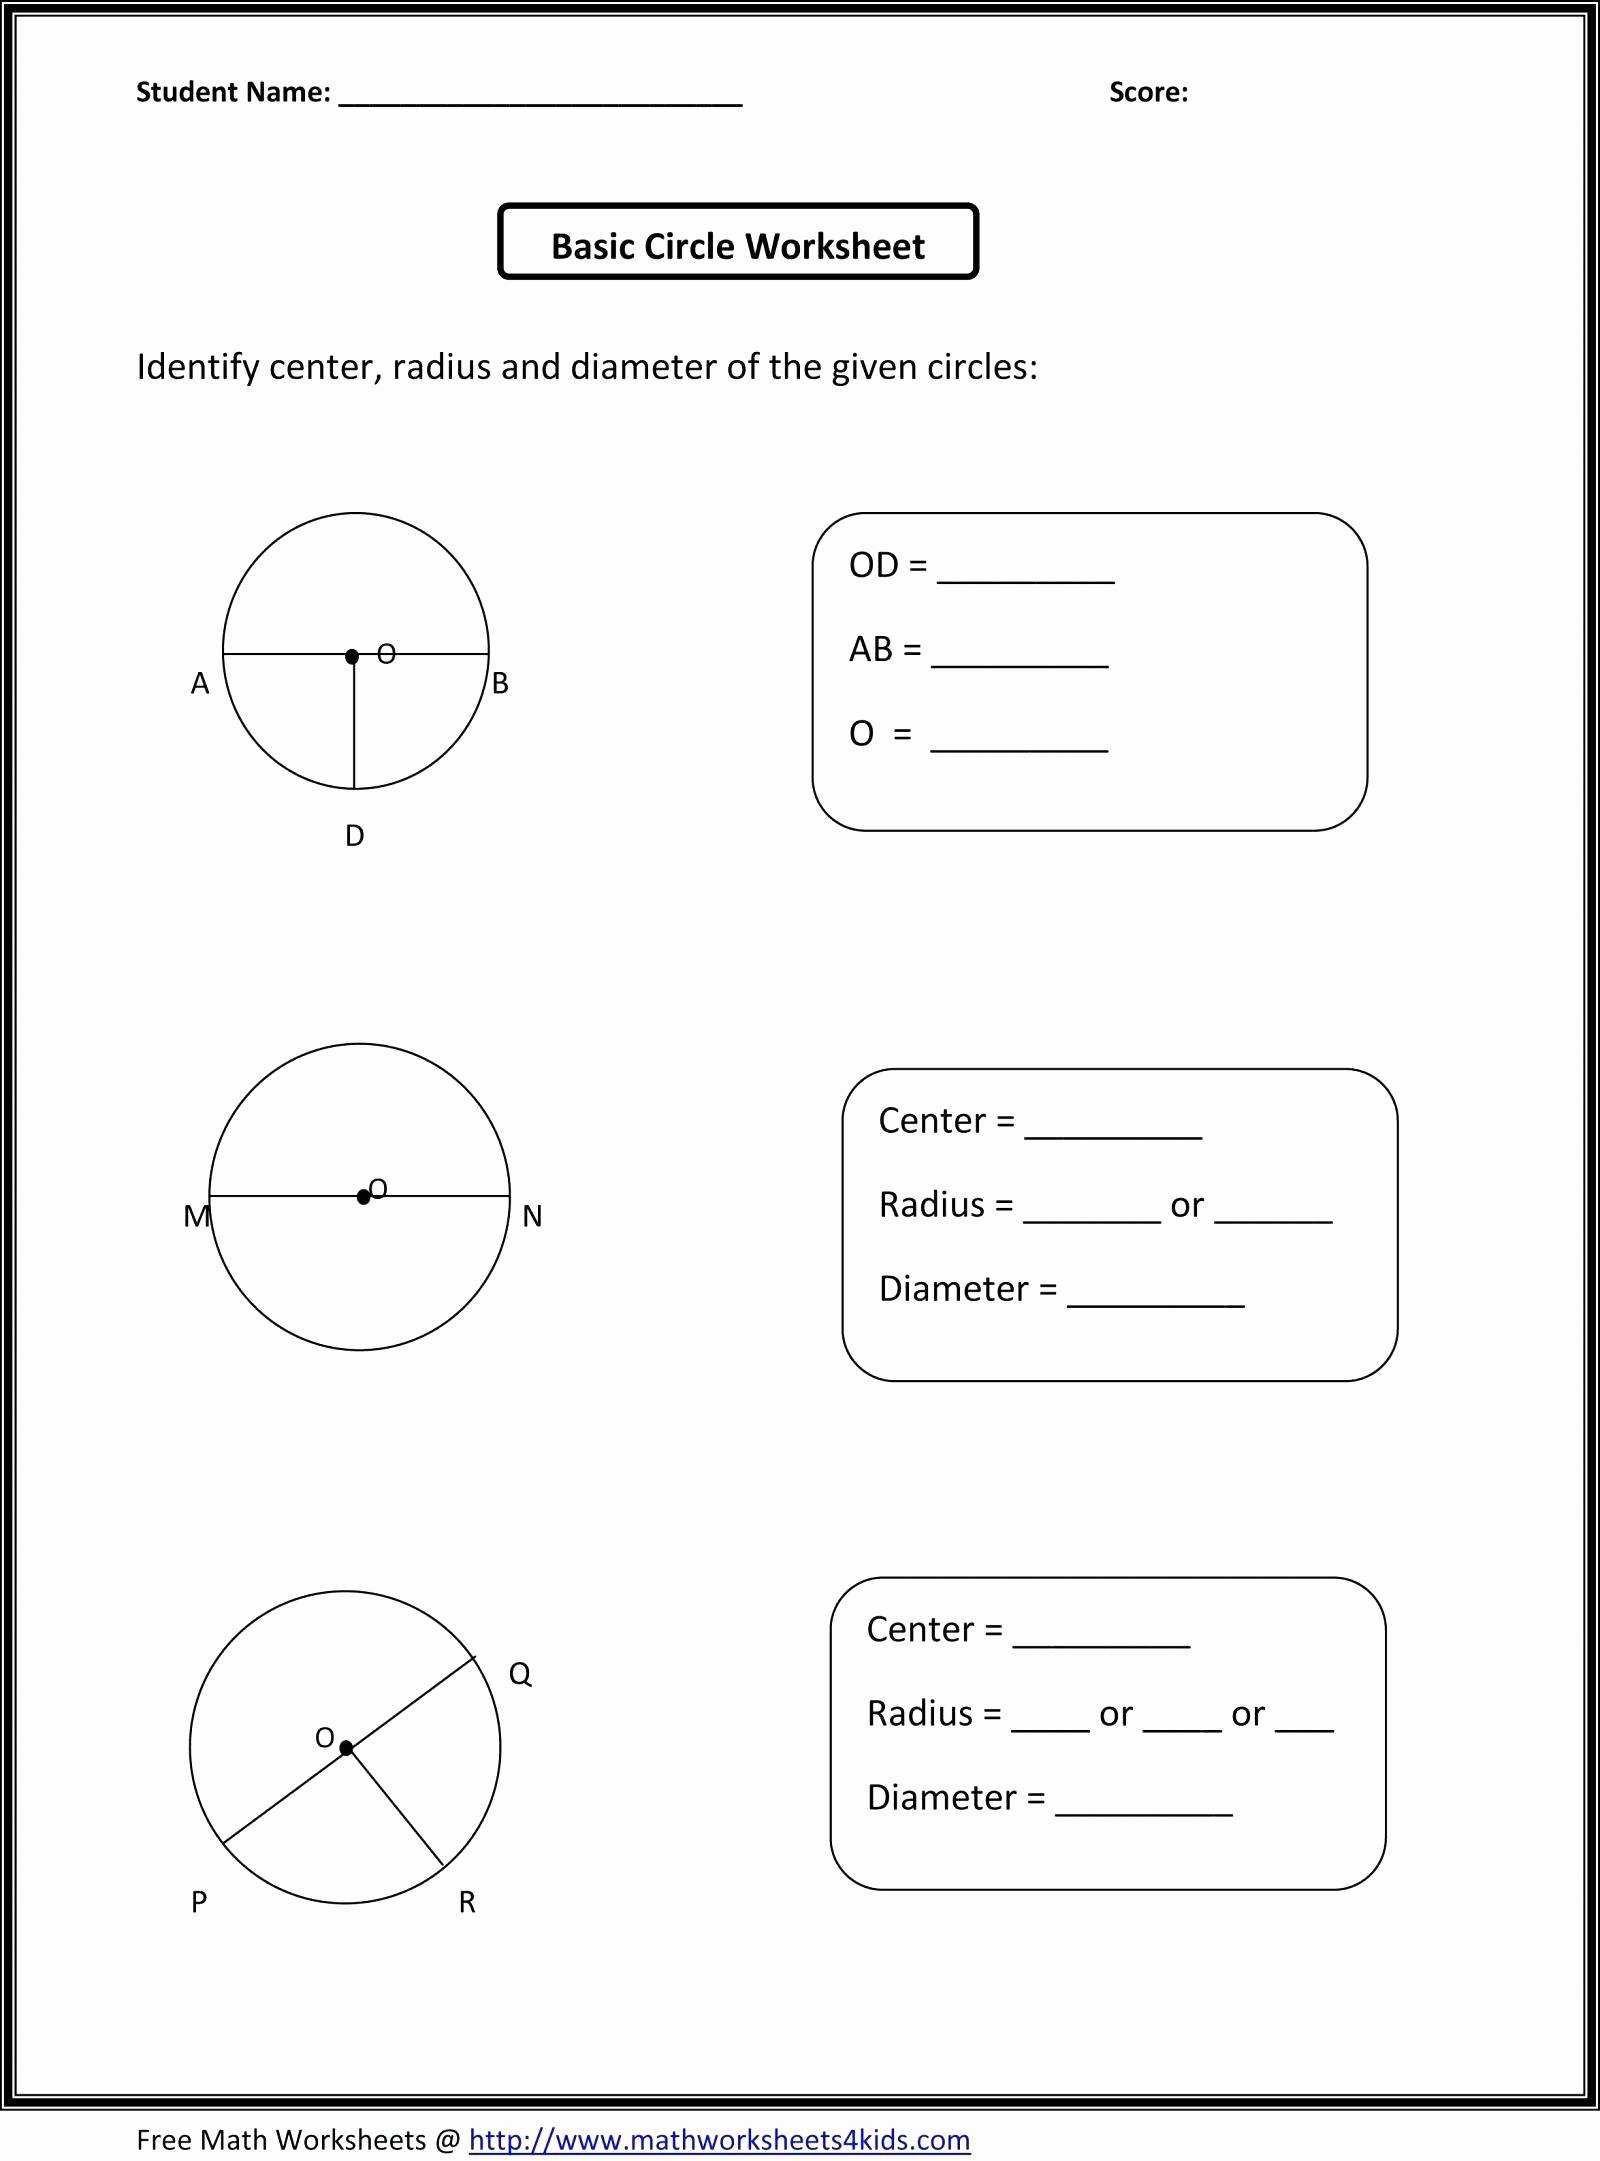 Inference Worksheets 3rd Grade with 3rd Grade social Stu S Worksheets Free with Worksheet 3rd Grade